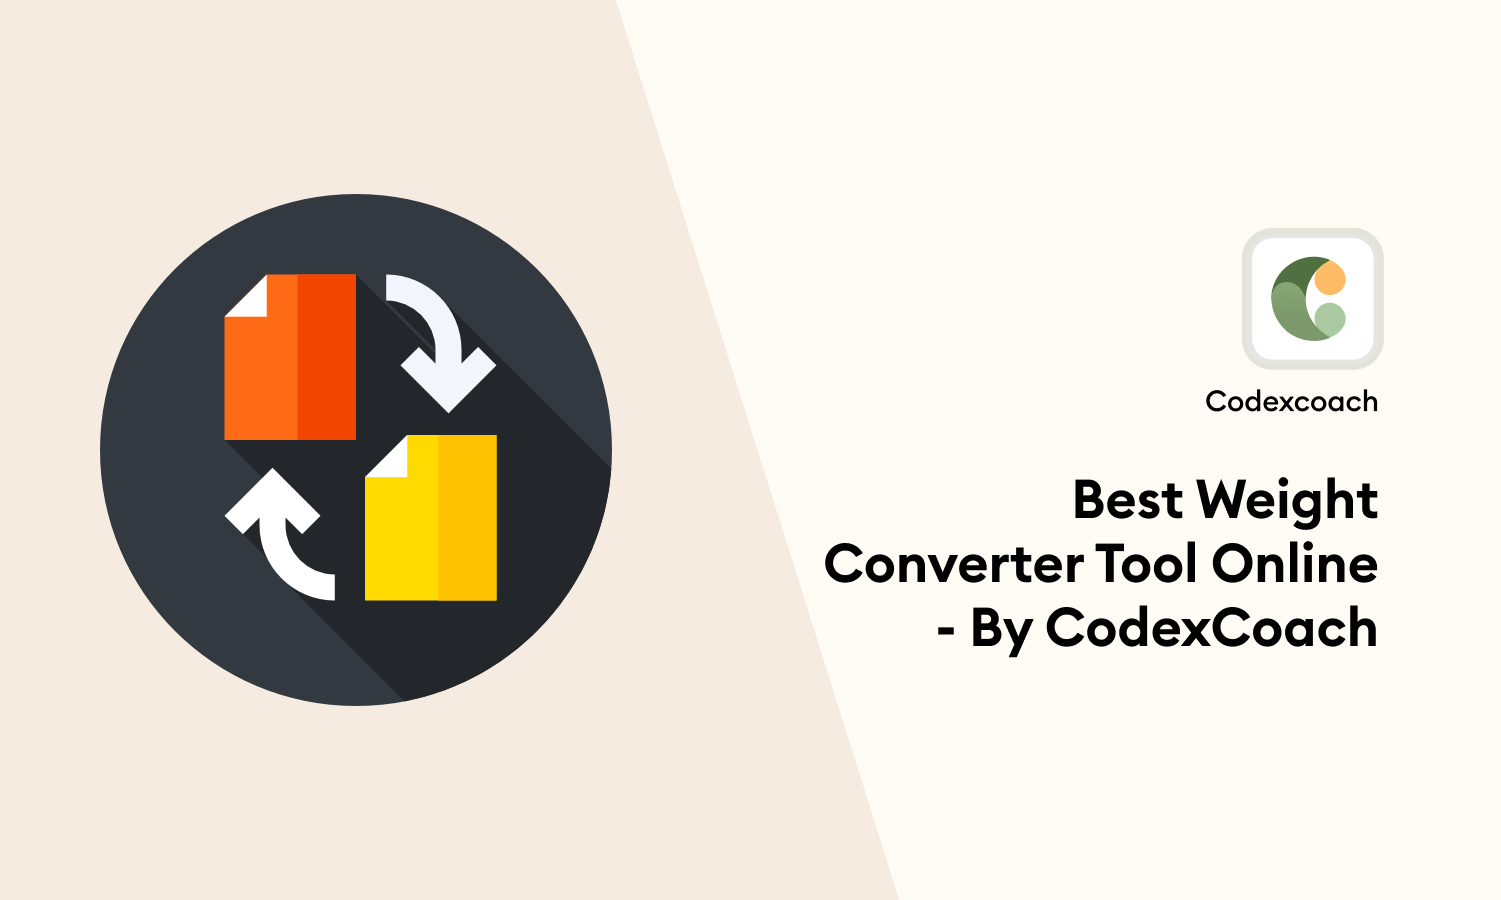 Best Weight Converter Tool Online - By CodexCoach